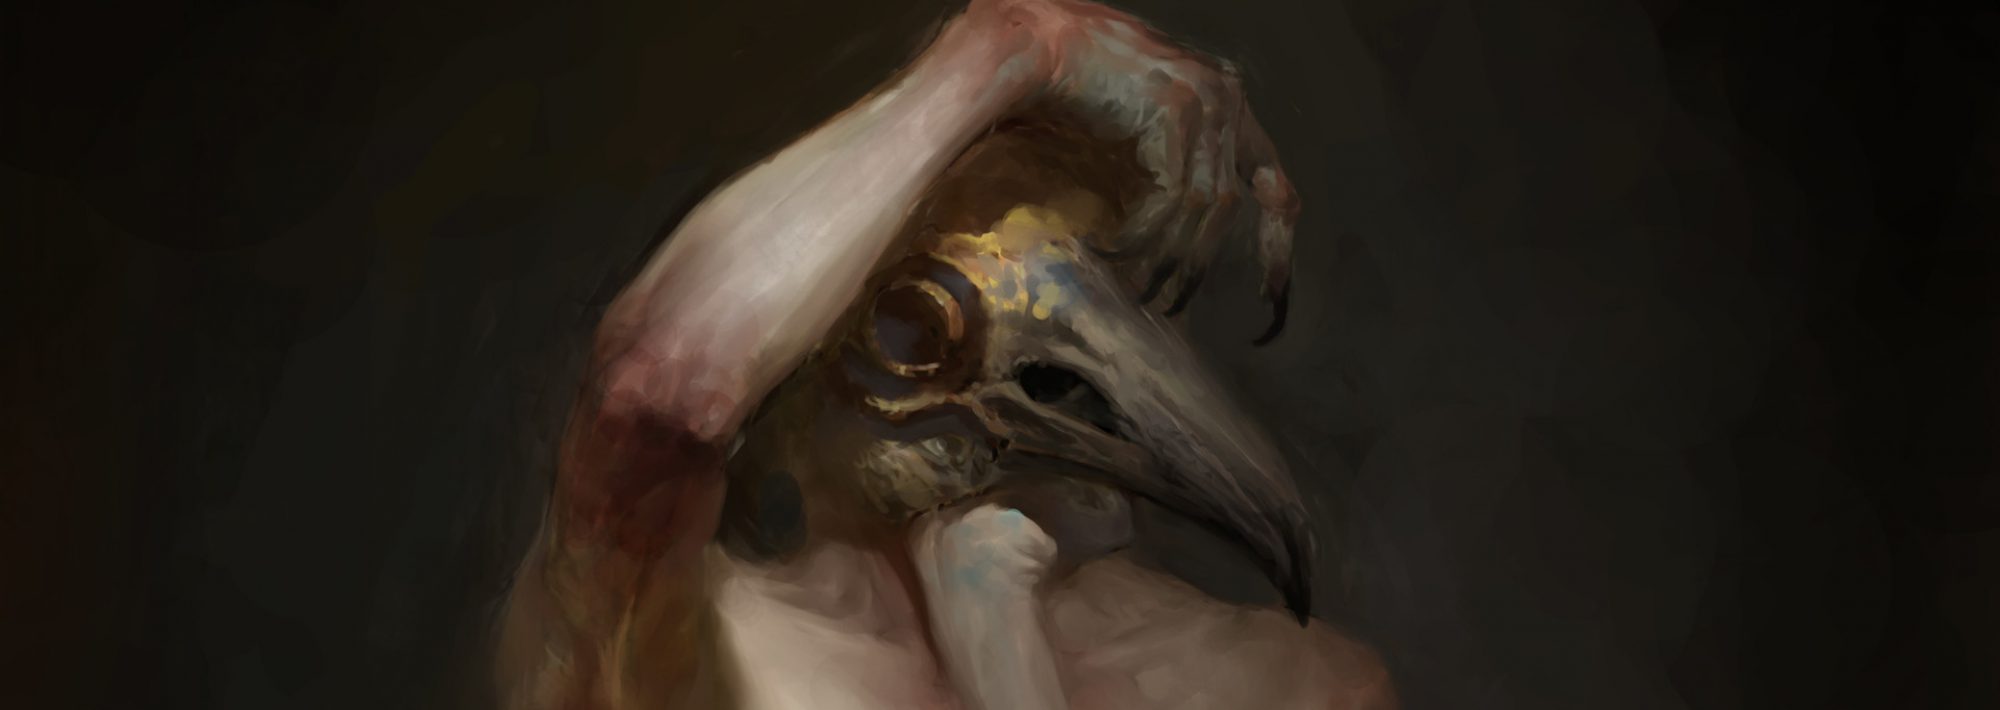 A painting of a man with a bird's skull for a head